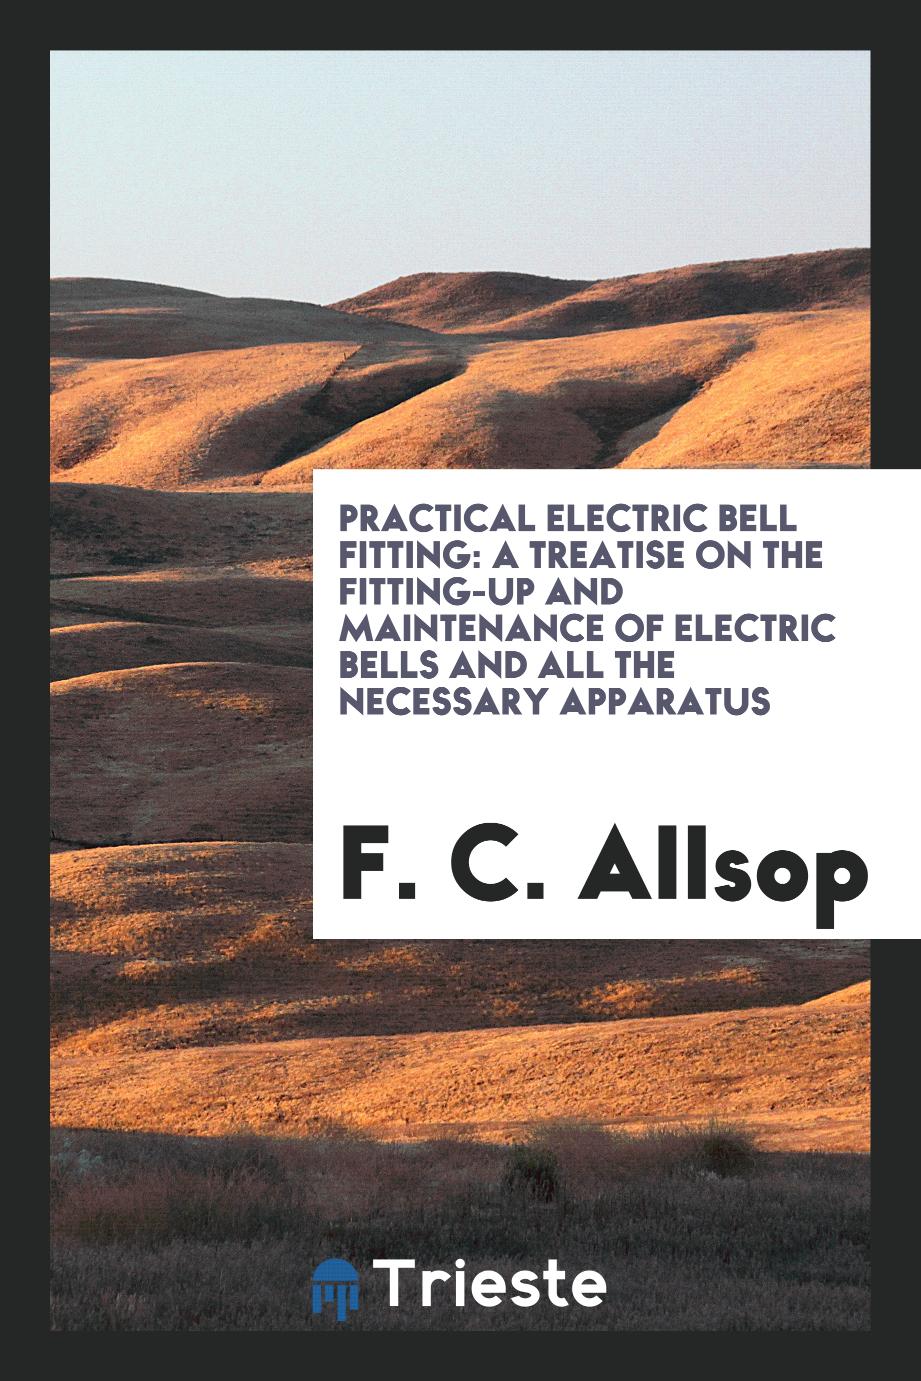 Practical Electric Bell Fitting: A Treatise on the Fitting-Up and Maintenance of Electric Bells and All the Necessary Apparatus